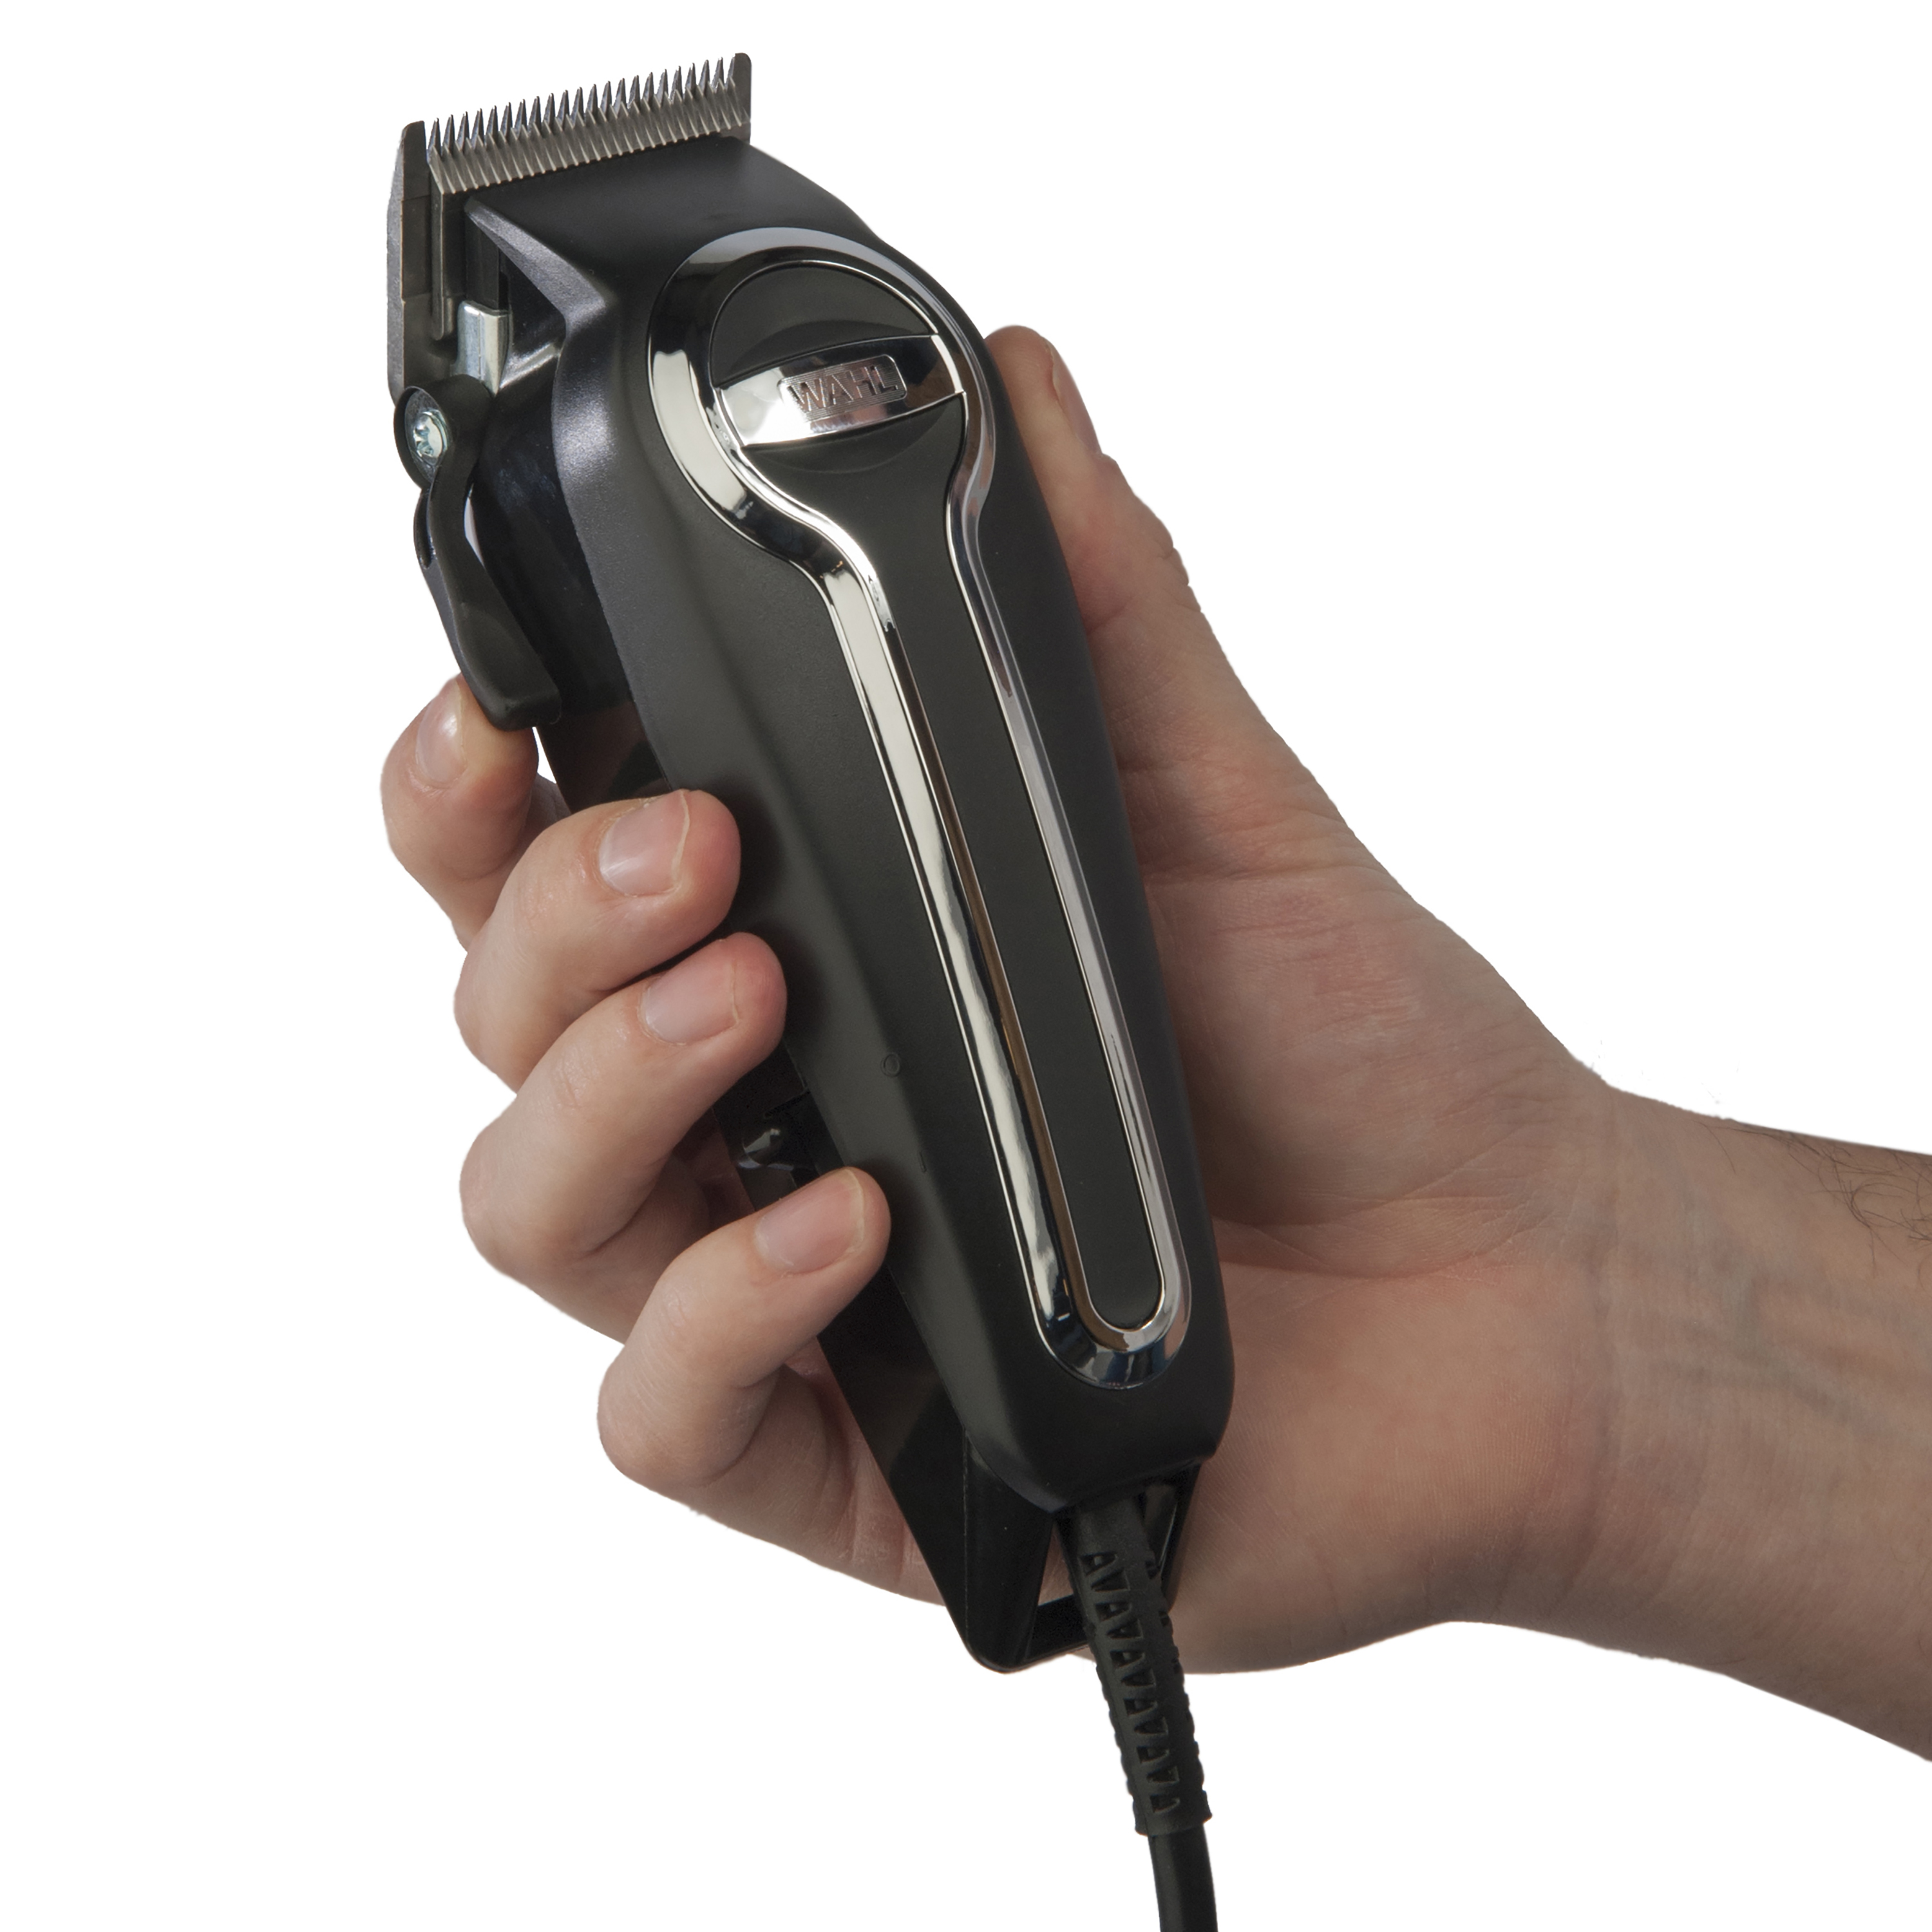 Wahl Clipper Elite Pro High-Performance Home Haircut ＆ Grooming Kit for Men Electric Hair Clipper Model 79602